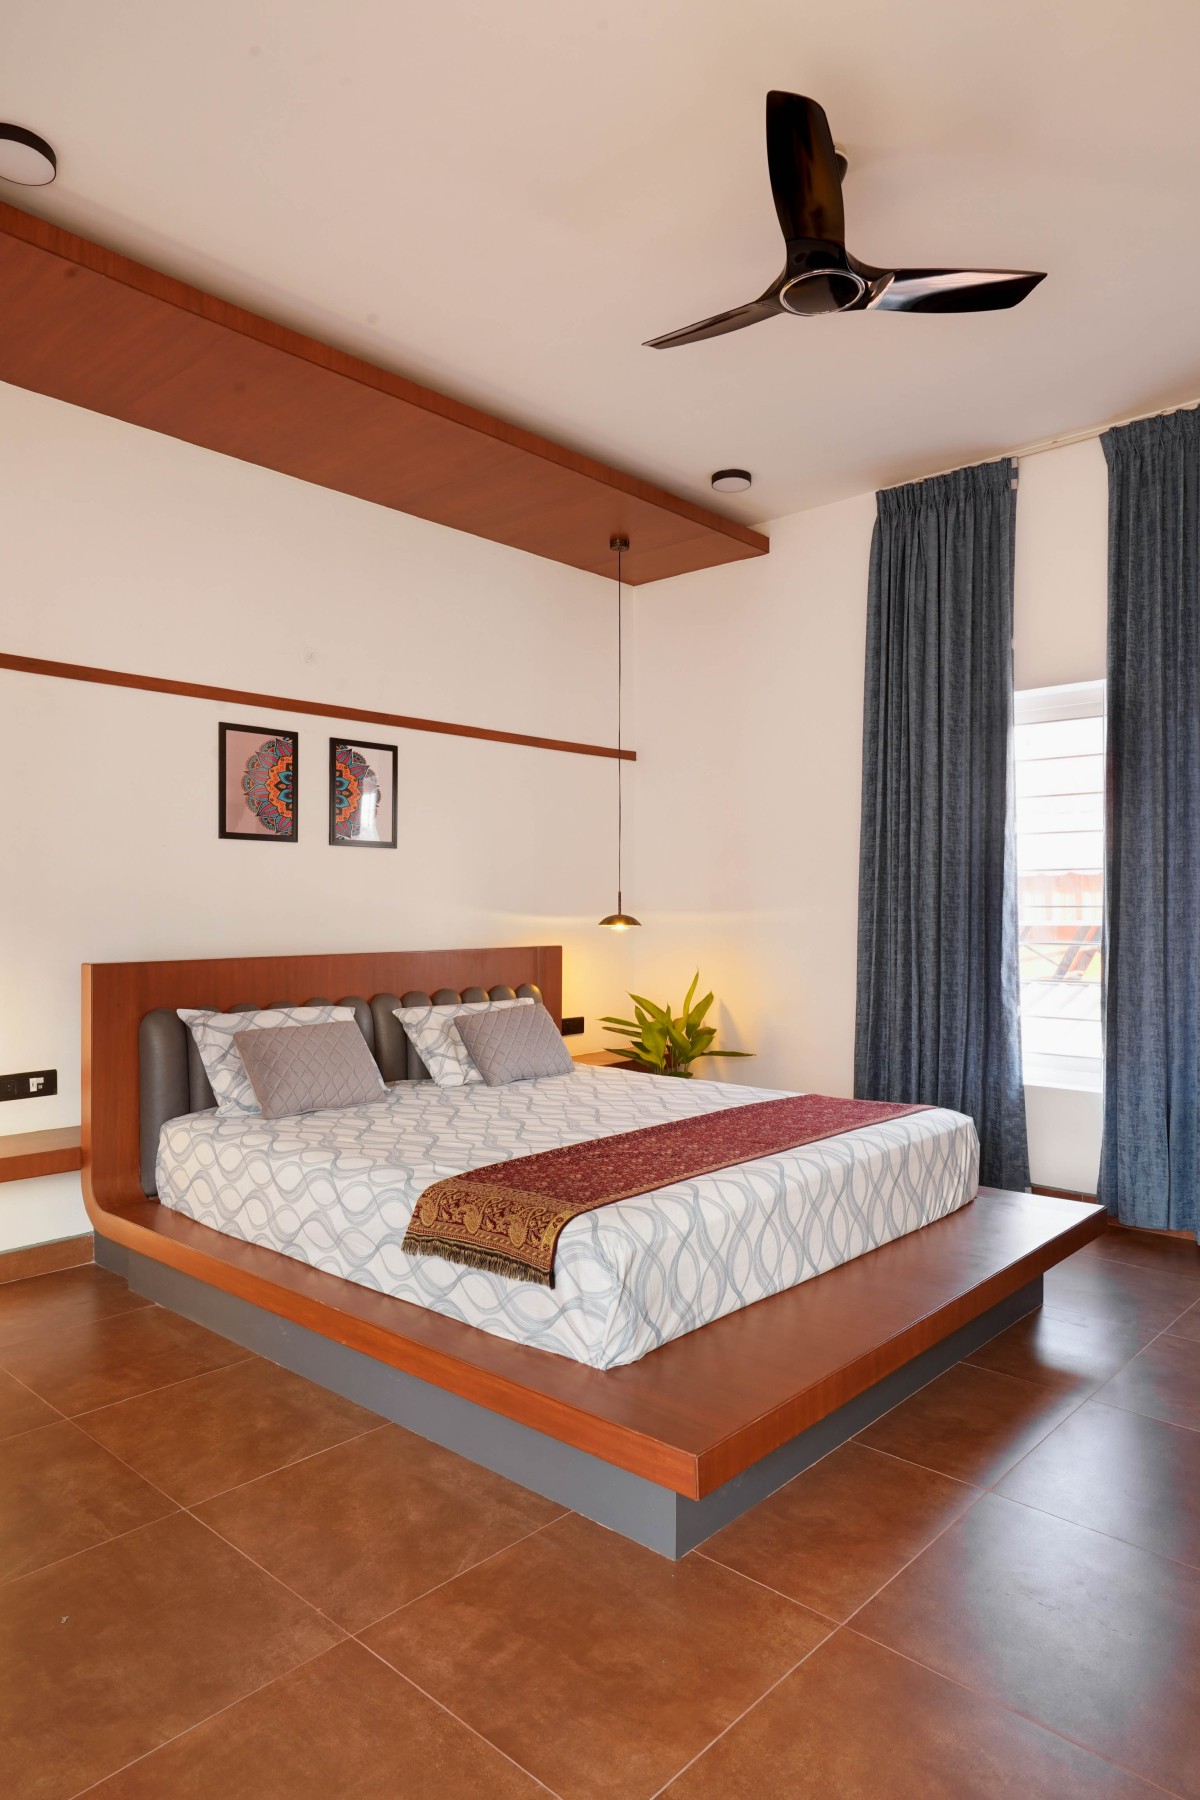 Bedroom 2 of Athulyam by Outlined Architects